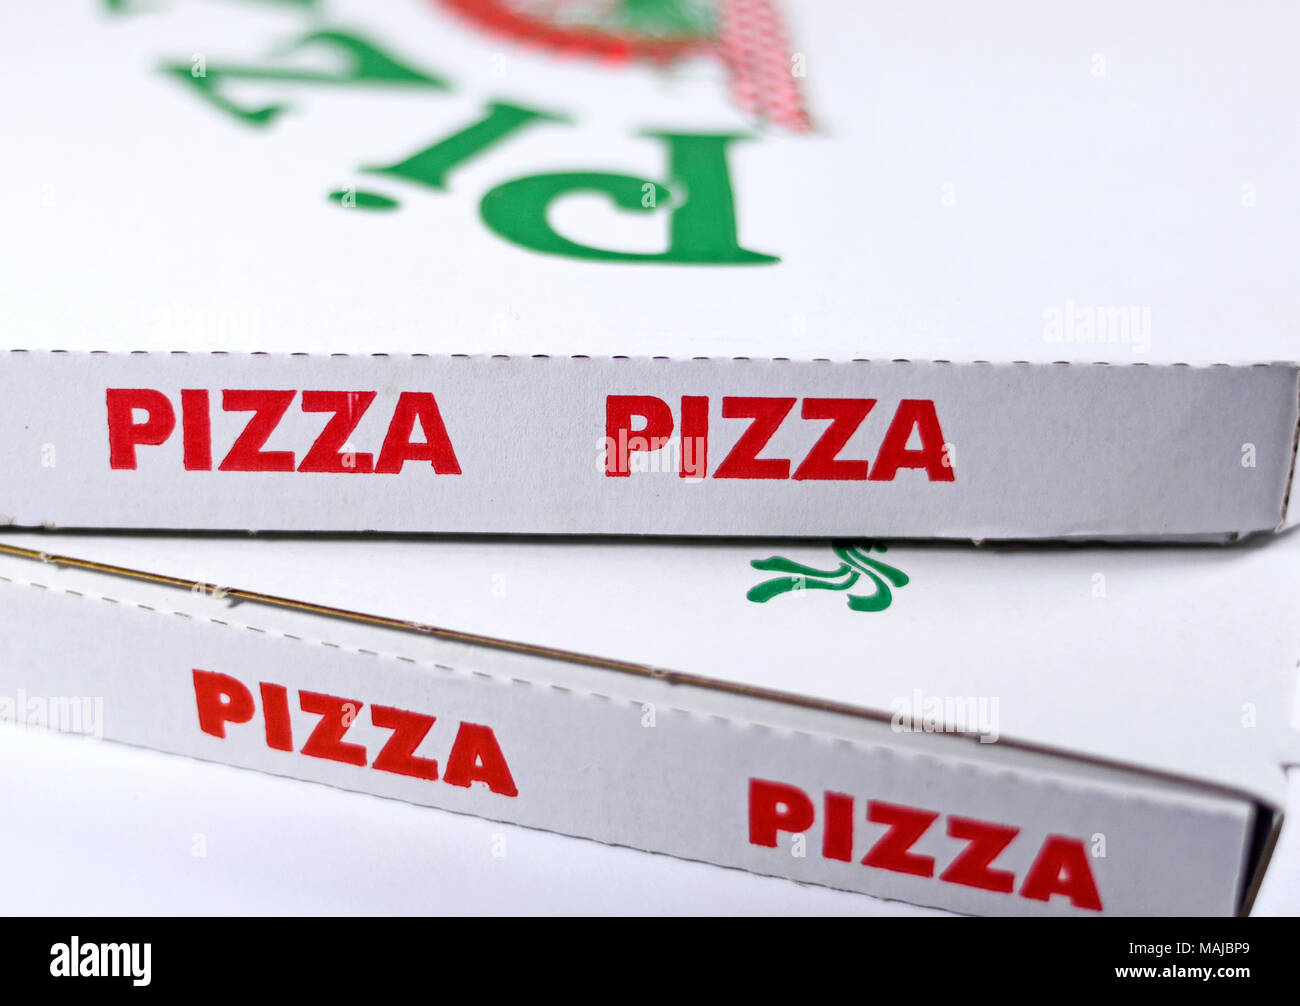 Pizza boxes or delivery boxes, isolated on white background. Pizza package, close-up shot. Stock Photo